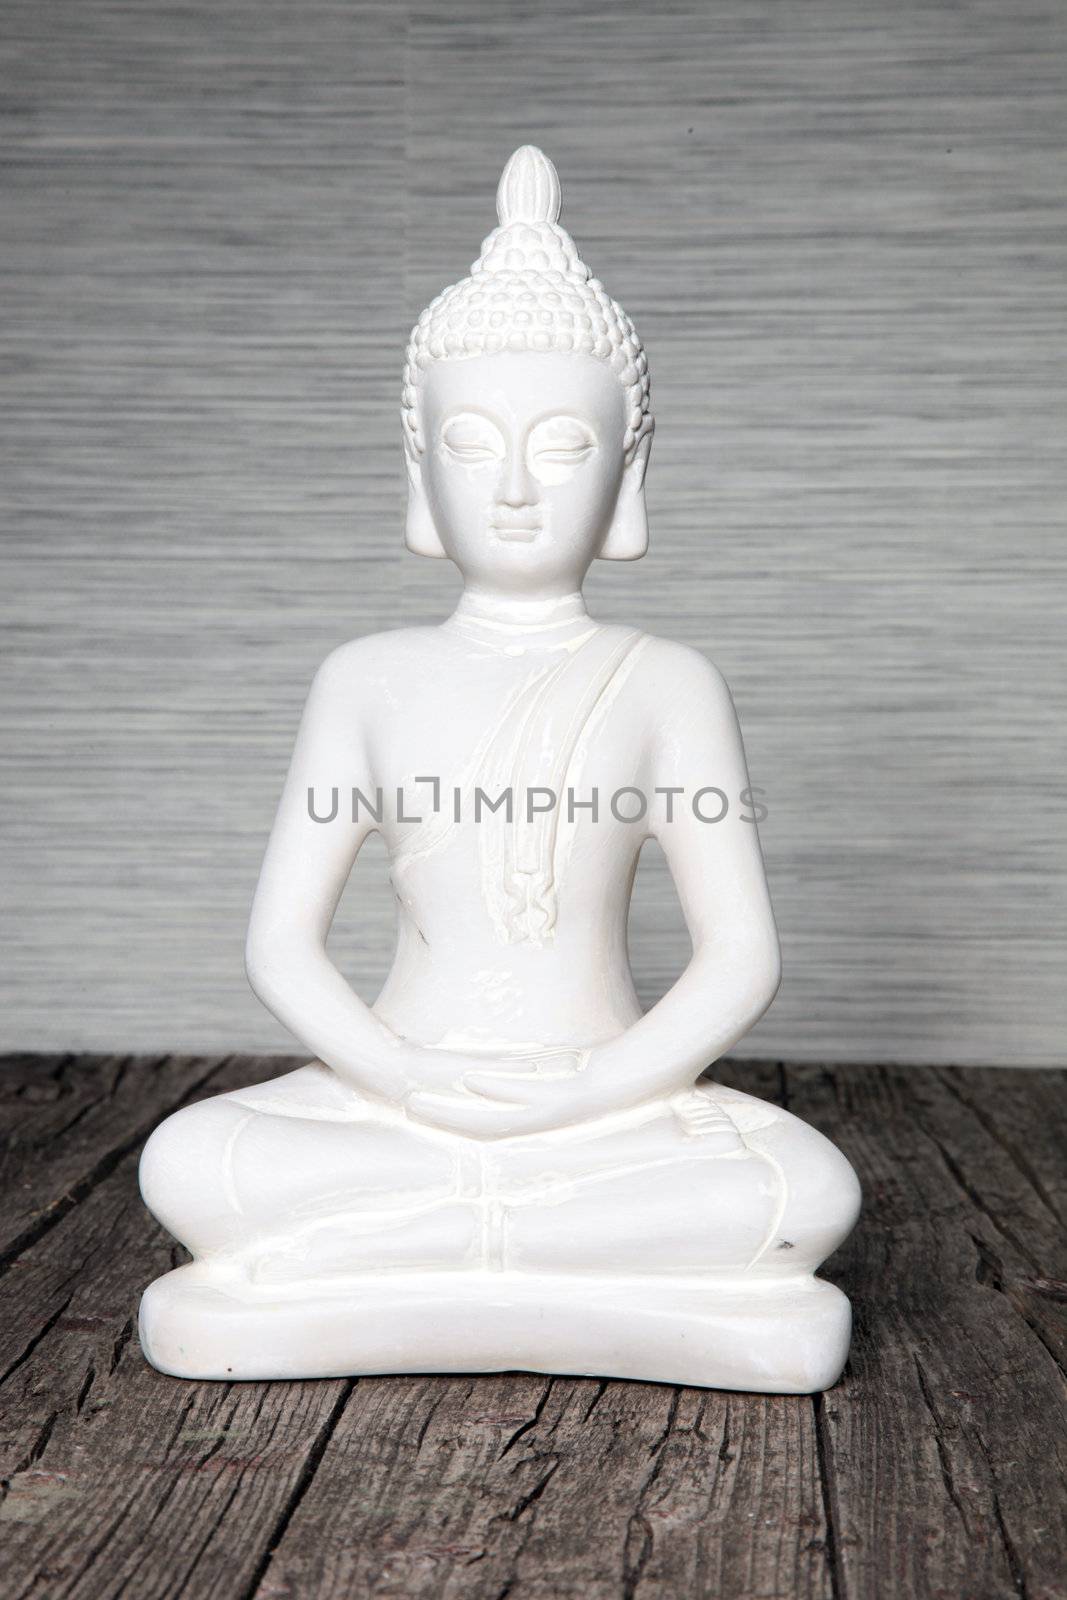 Indoor white seated statue of Buddha sitting in the lotus position with clasped hands meditating and praying on weathered timber boards